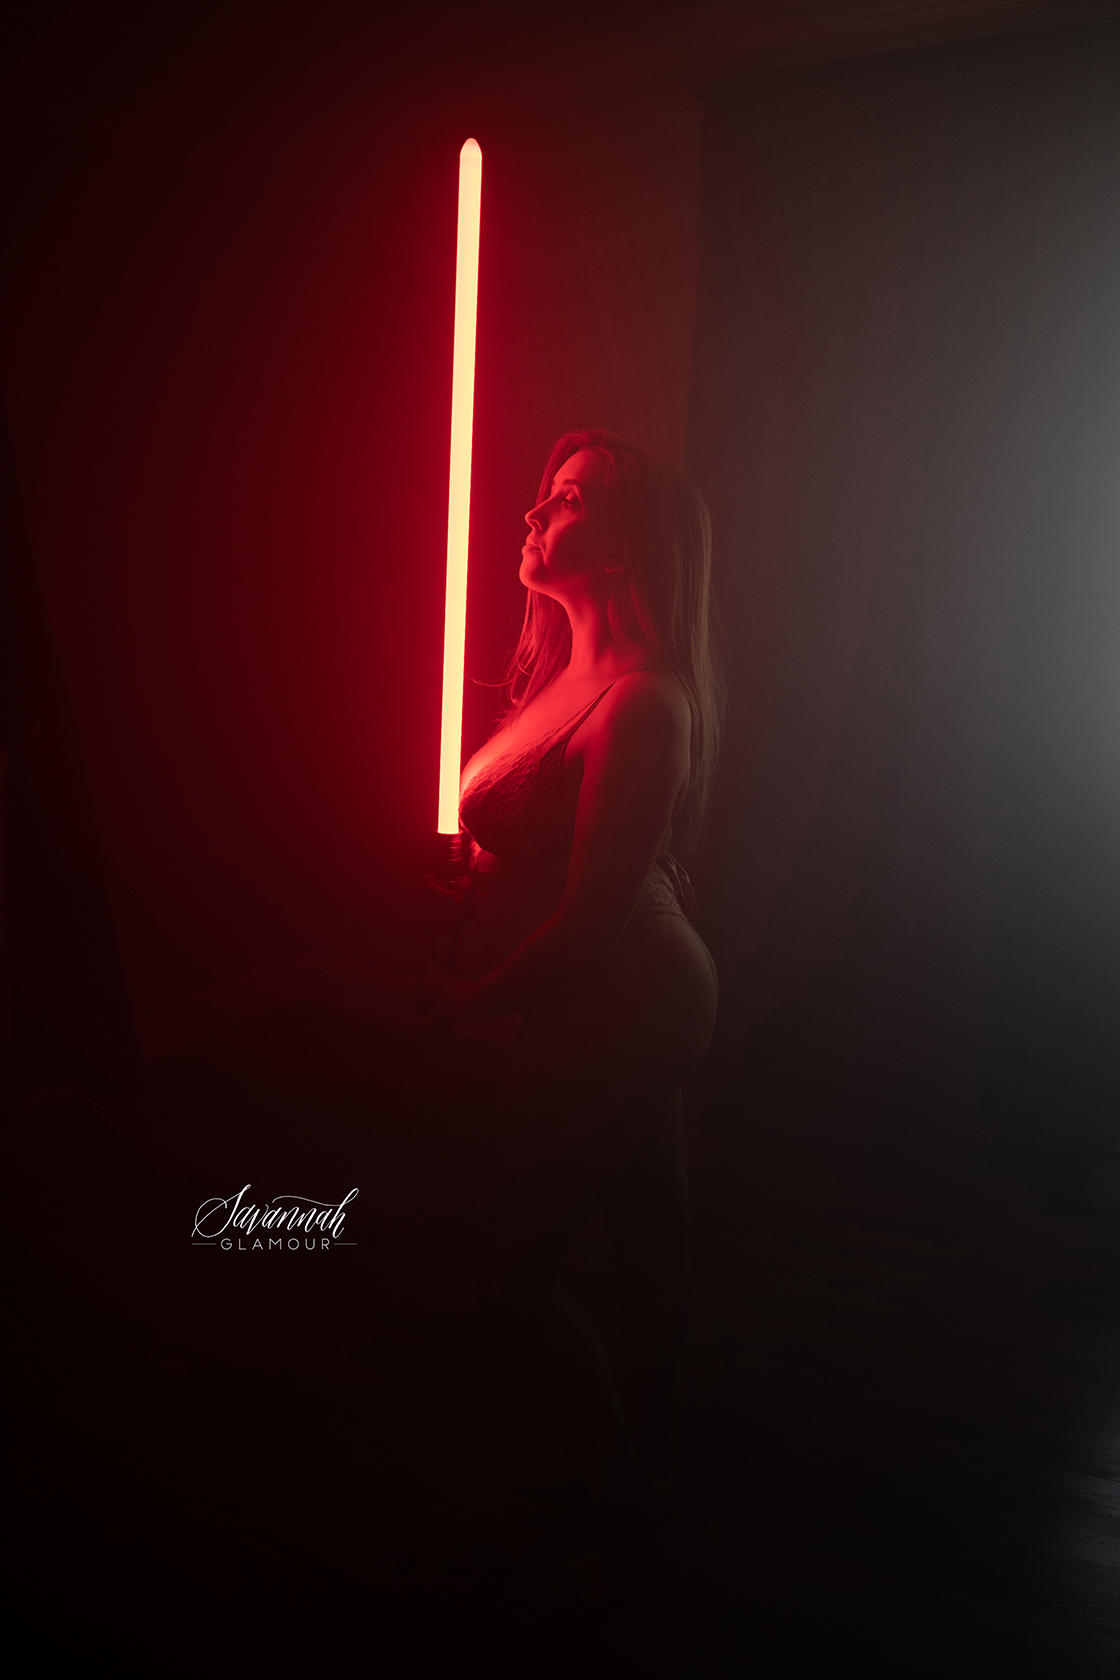 portrait of woman in lingerie holding a lightsaber